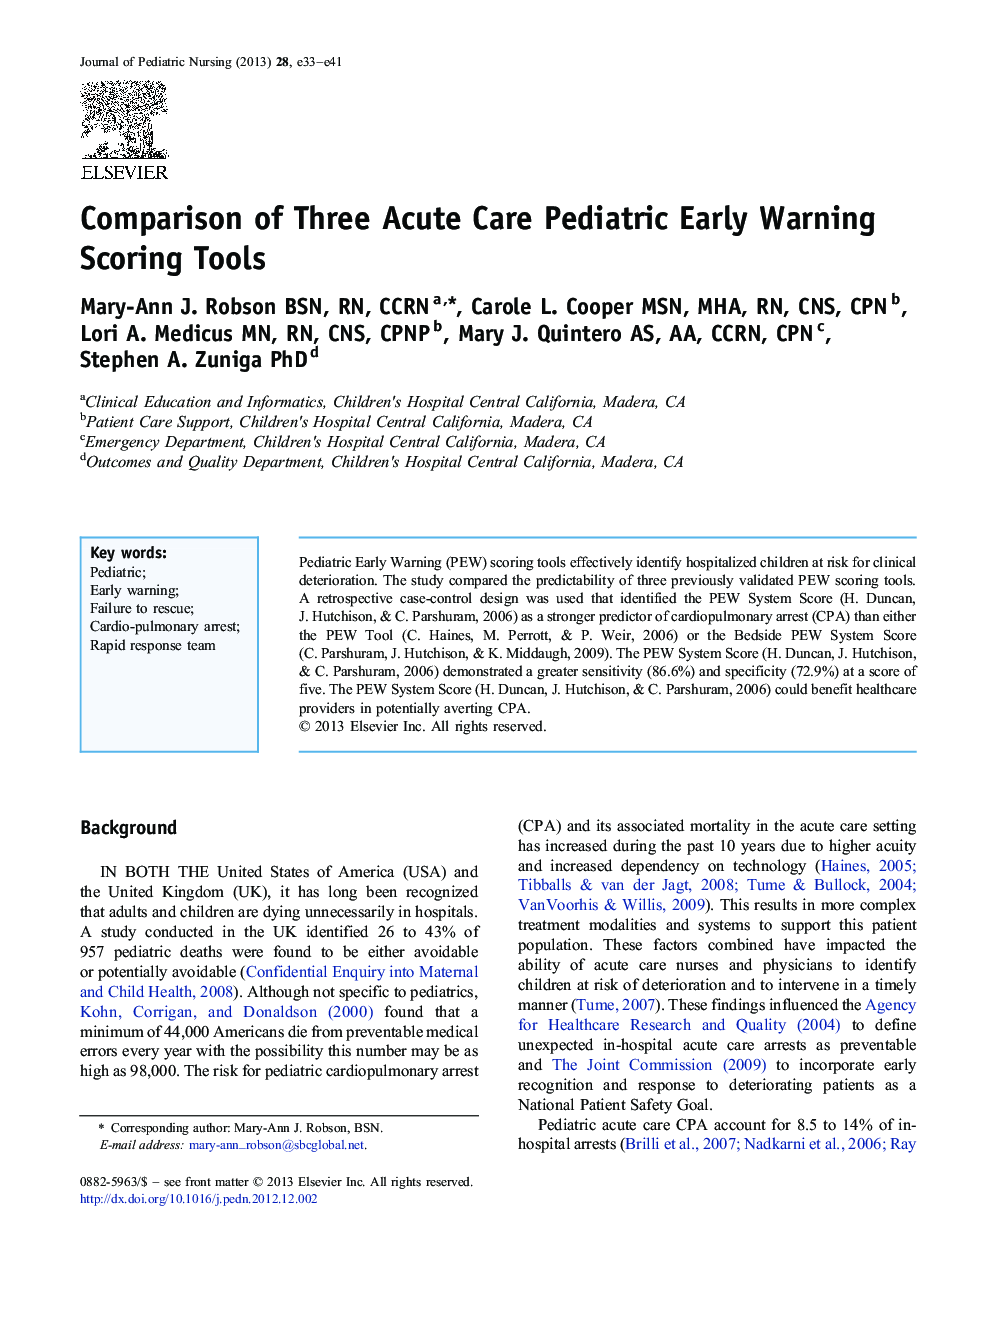 Comparison of Three Acute Care Pediatric Early Warning Scoring Tools